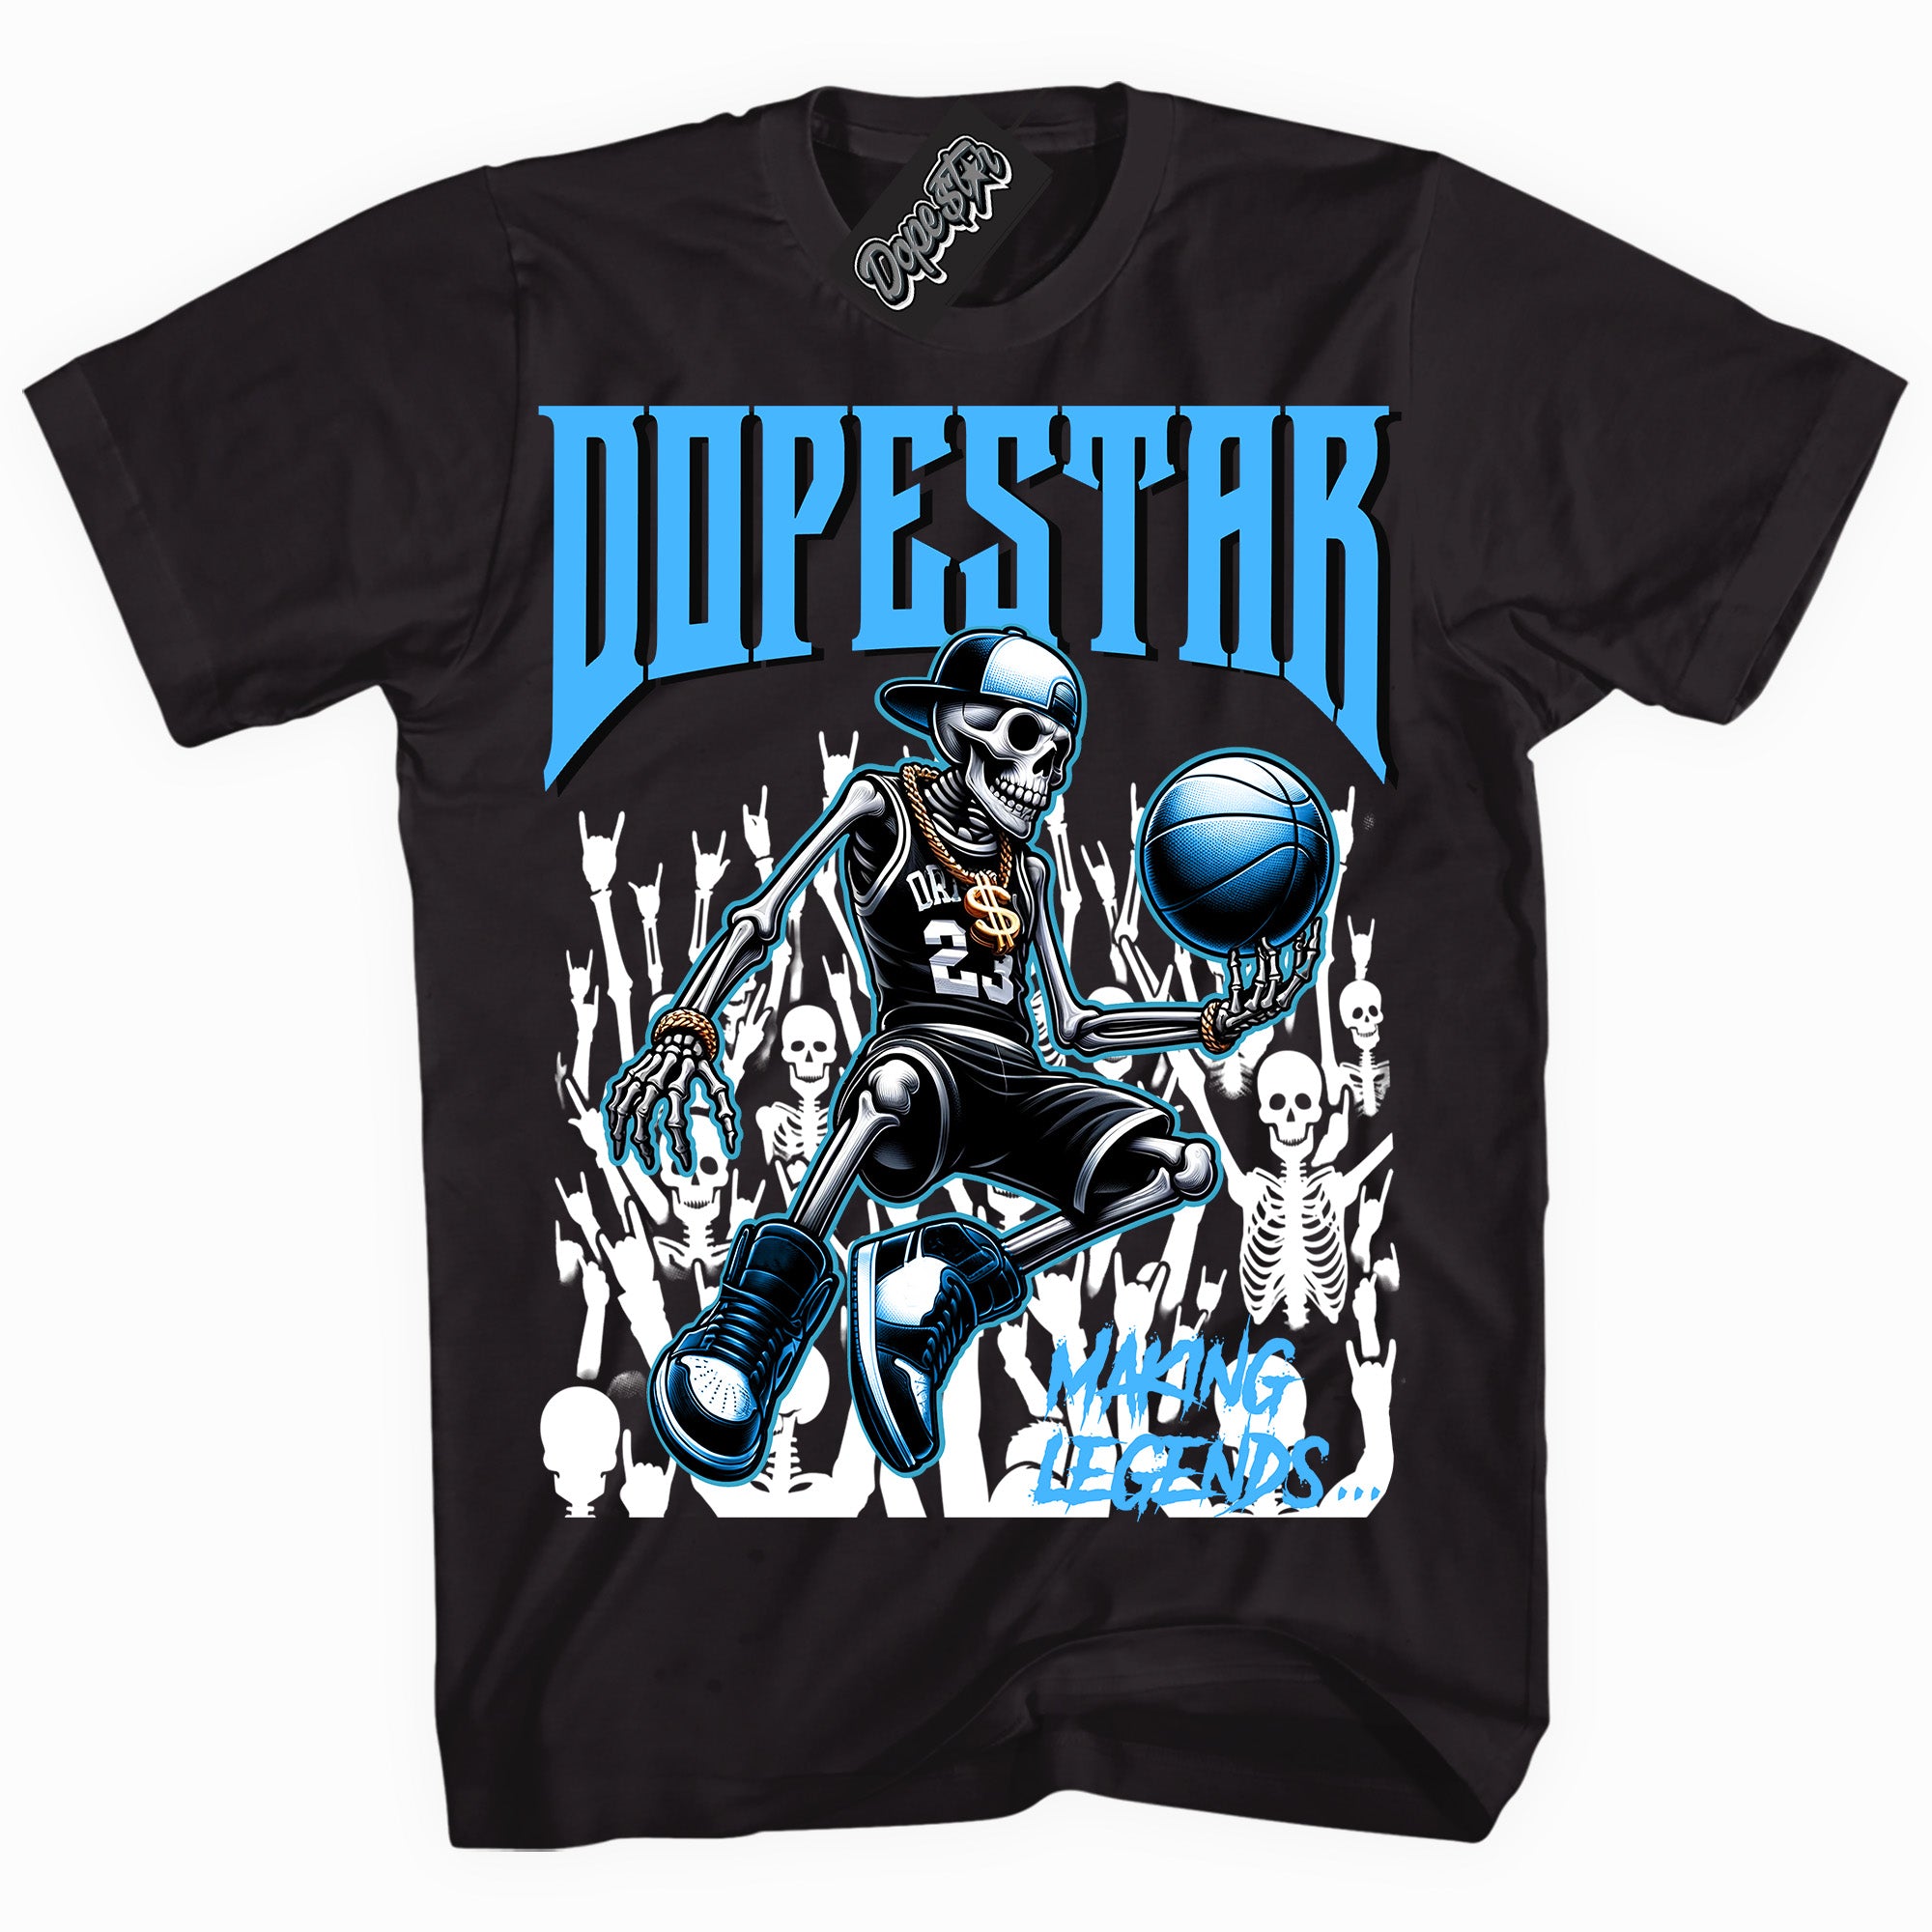 Cool Black graphic tee with “ Making Legends ” design, that perfectly matches Powder Blue 9s sneakers